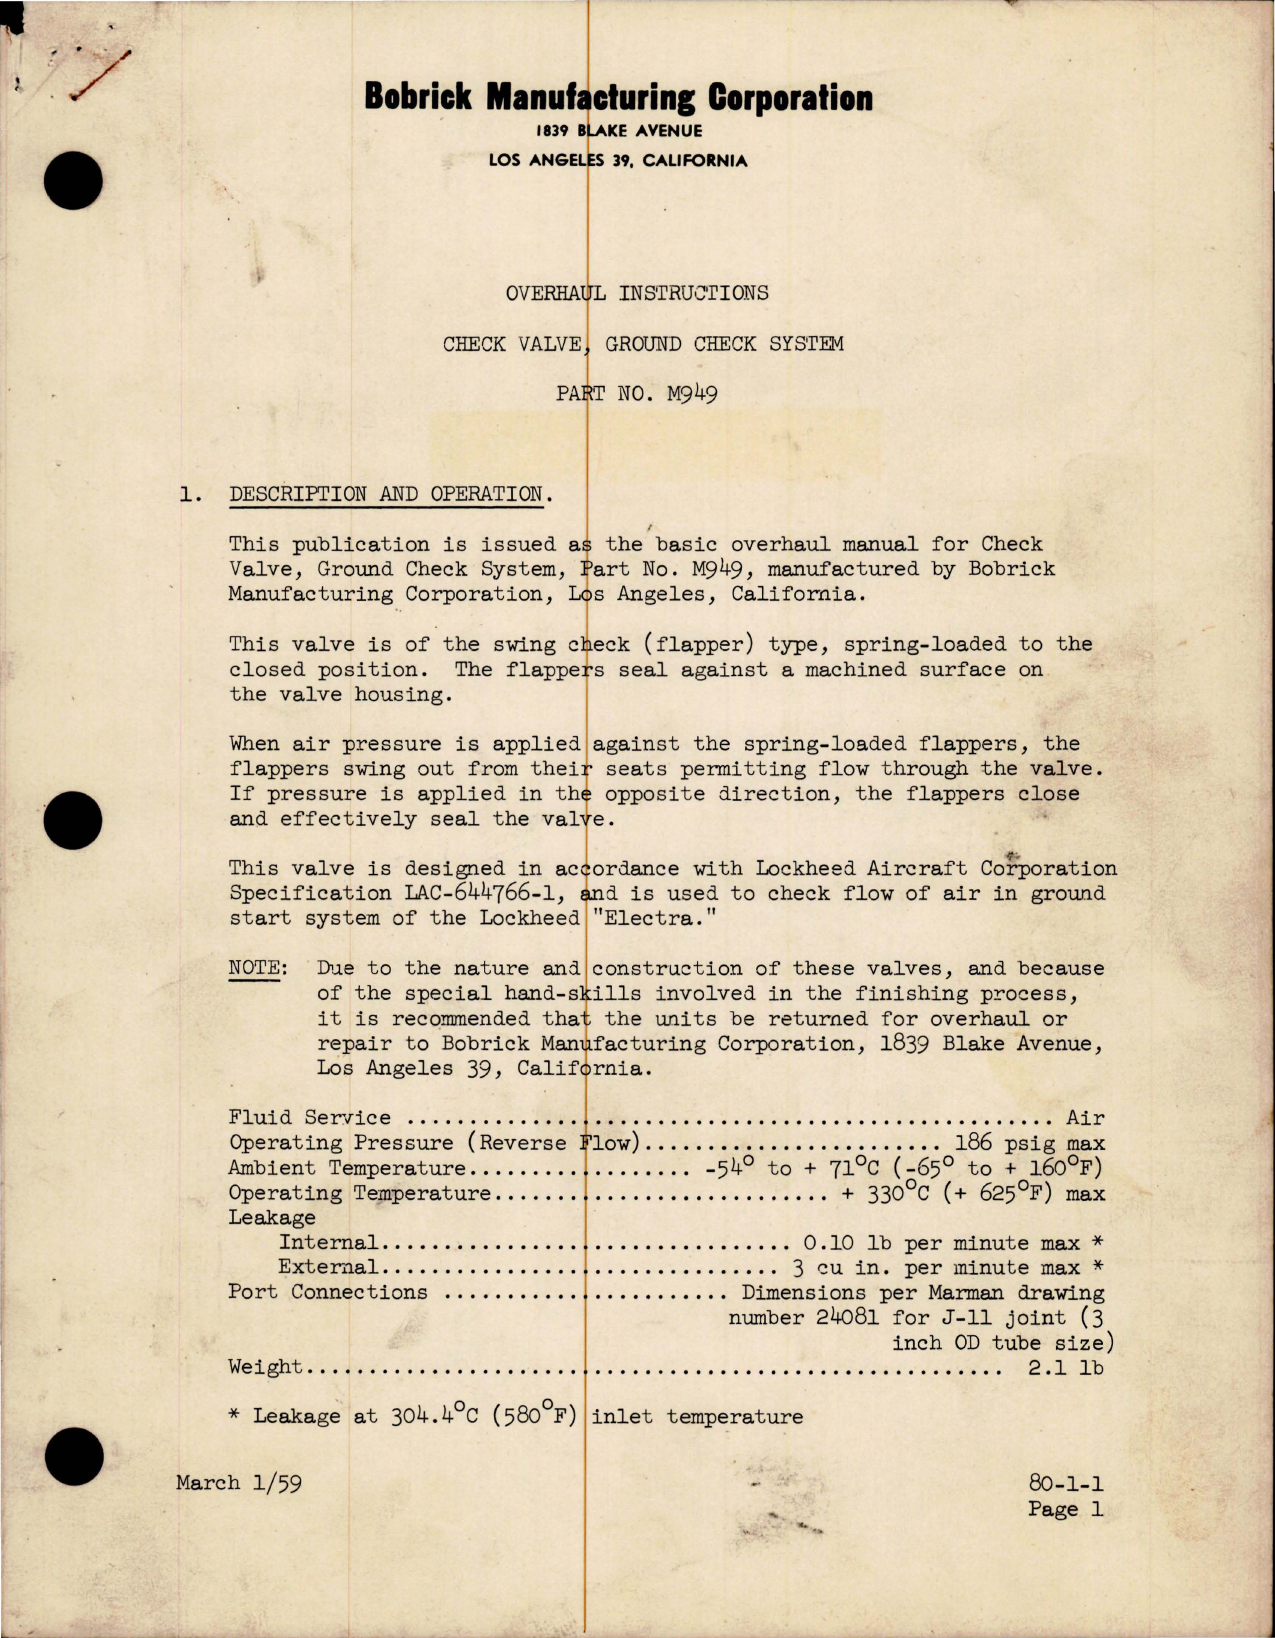 Sample page 1 from AirCorps Library document: Overhaul Instructions for Ground Check System Check Valve - Part M949 